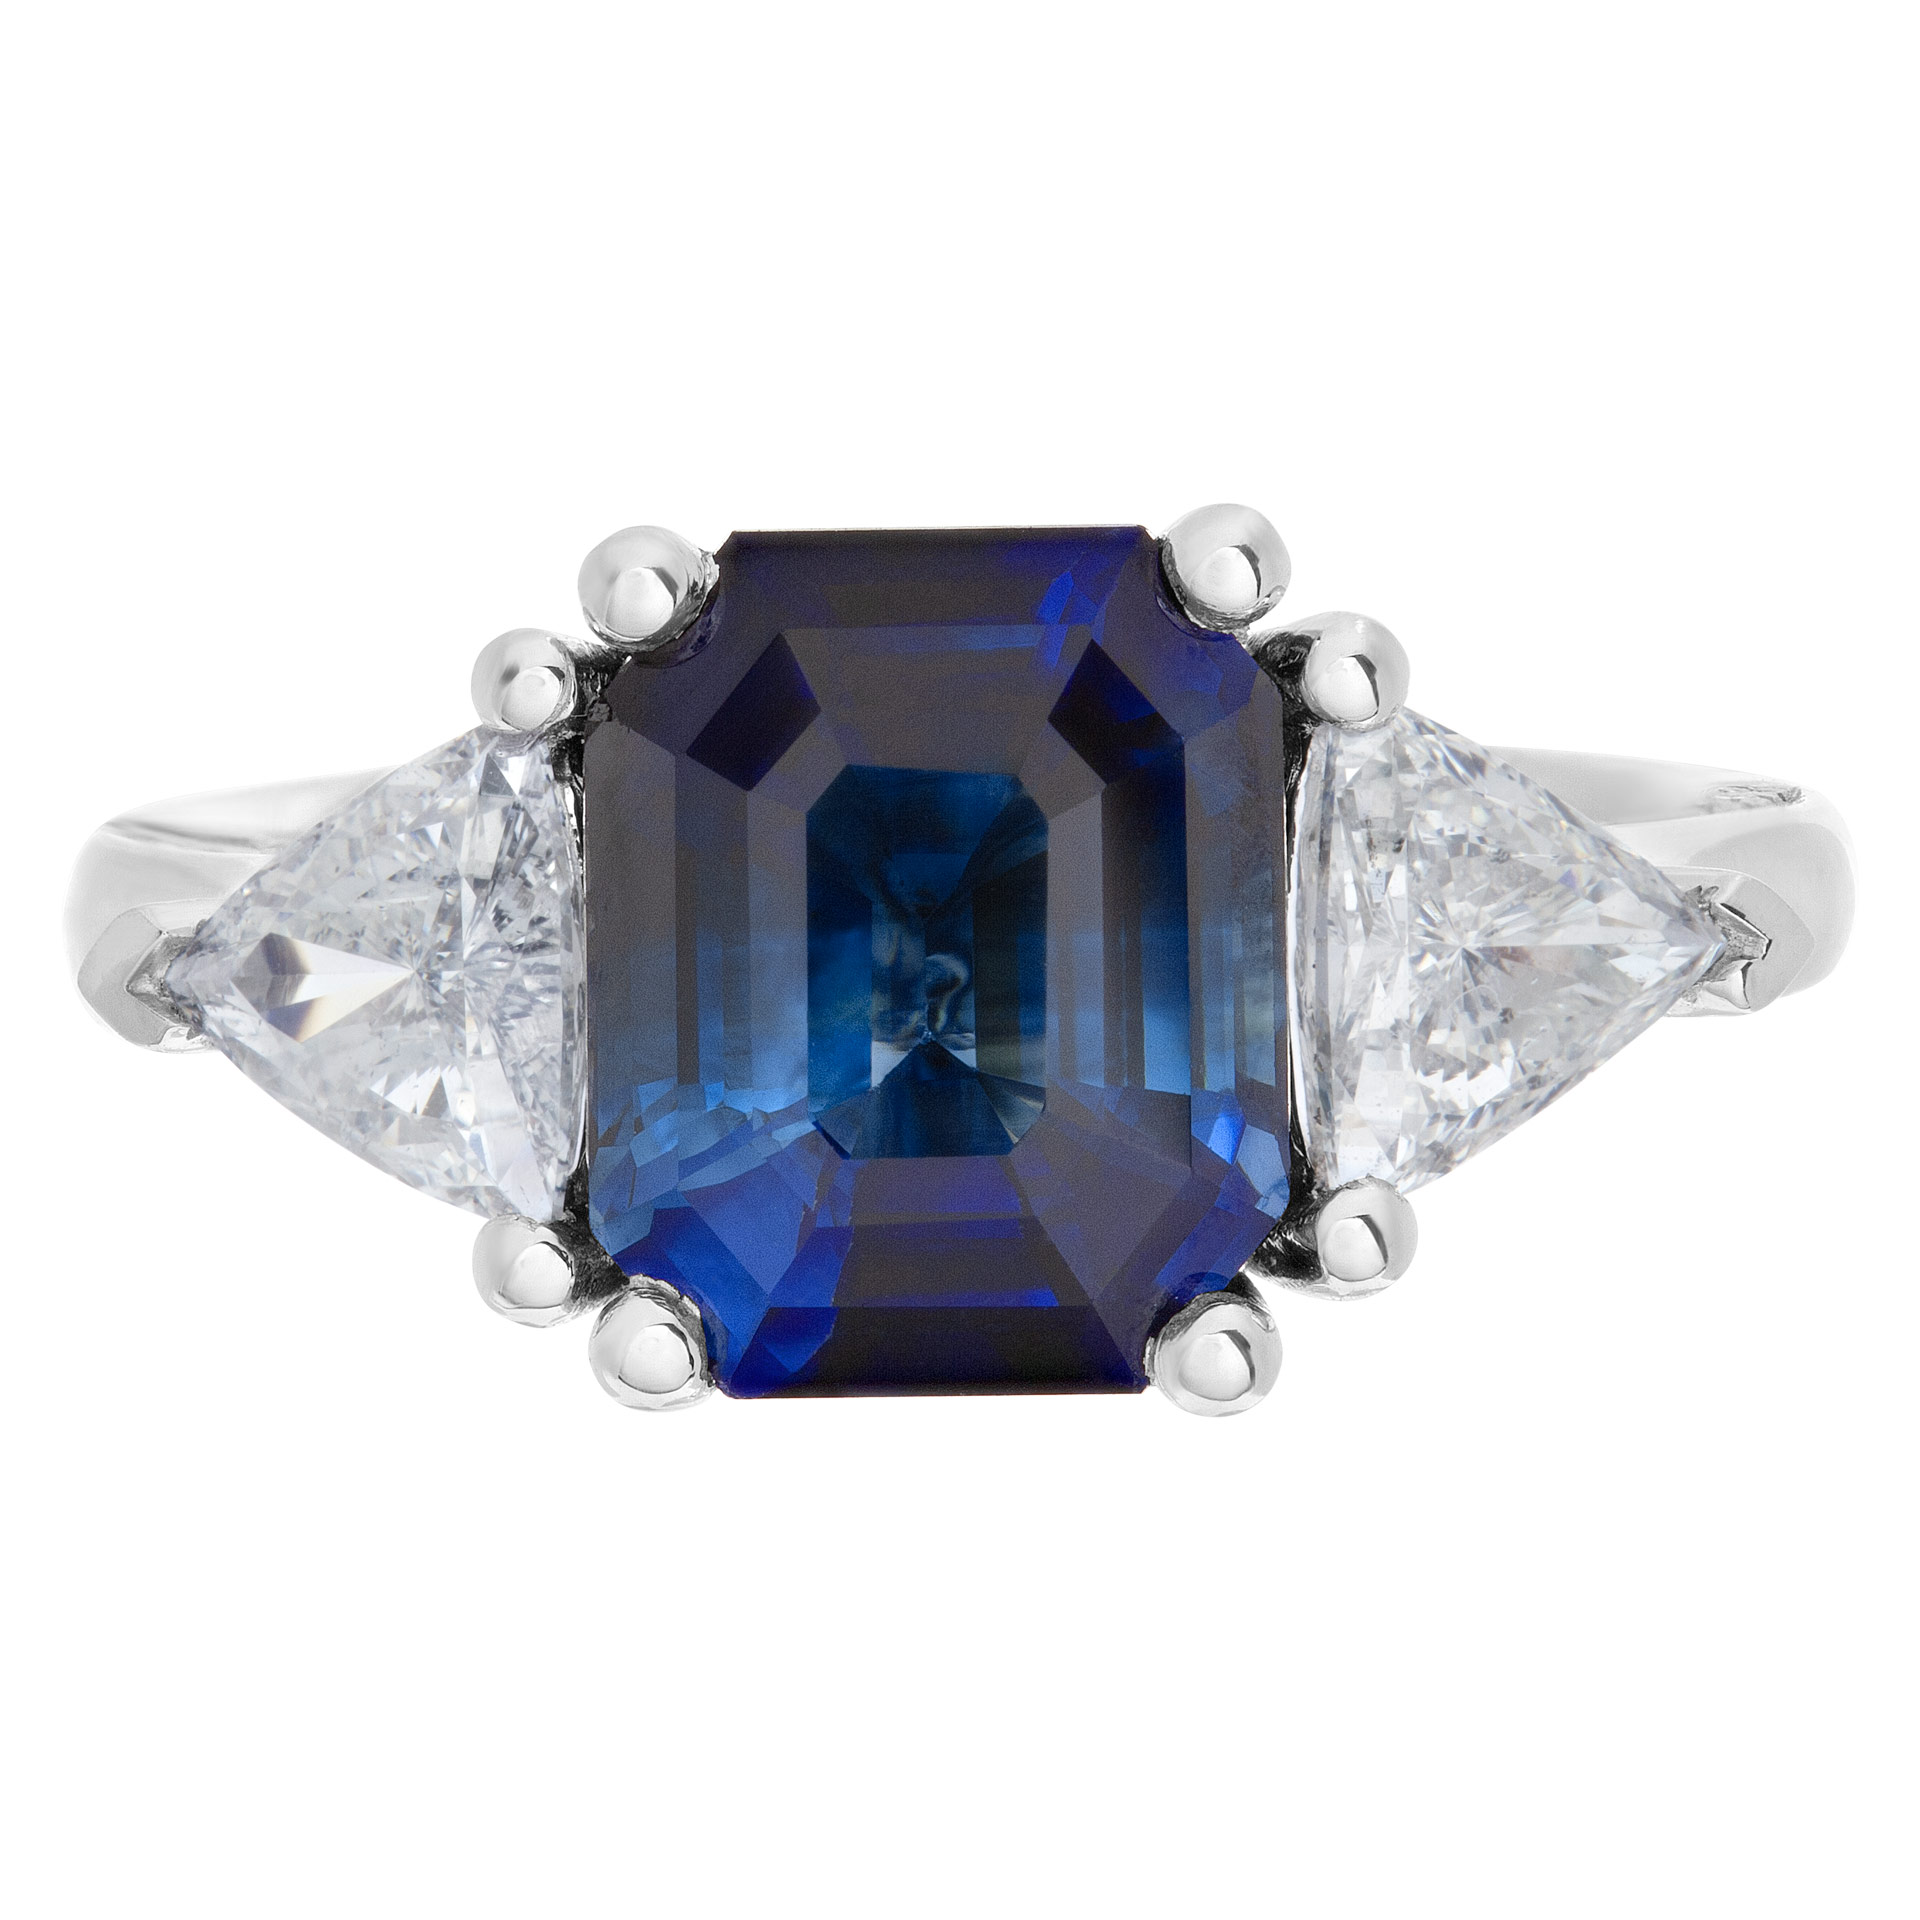 Stunning blue sapphire and diamond ring in platinum with 4.49 carats in central sapphire and 1.01 carats in side triangle cut diamonds